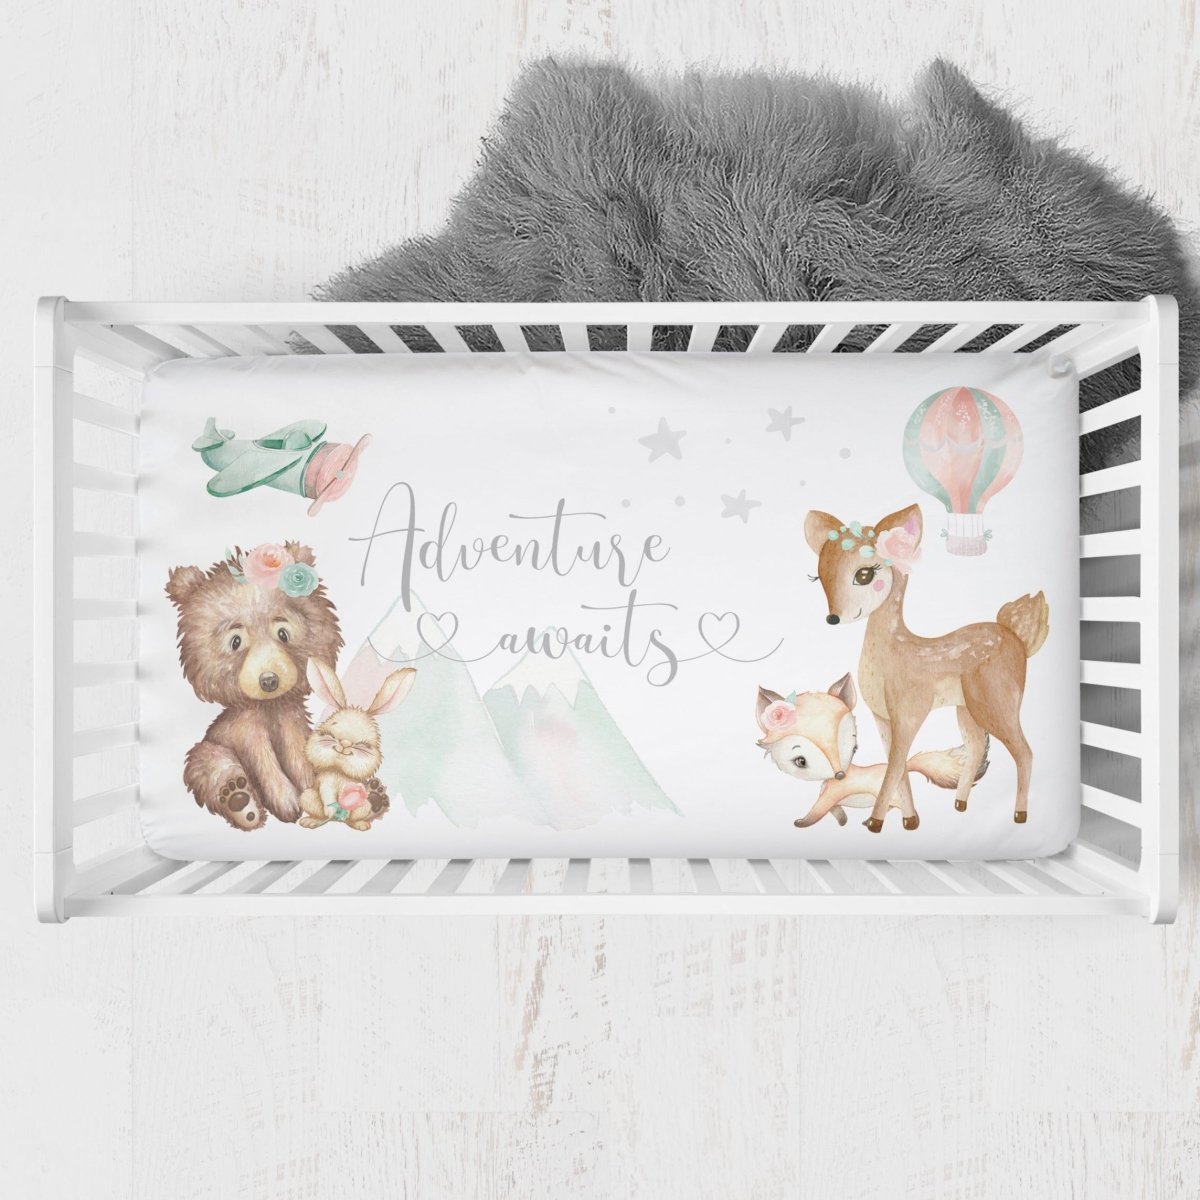 Woodland Floral Adventure Nursery Collection - gender_girl, text, Theme_Adventure